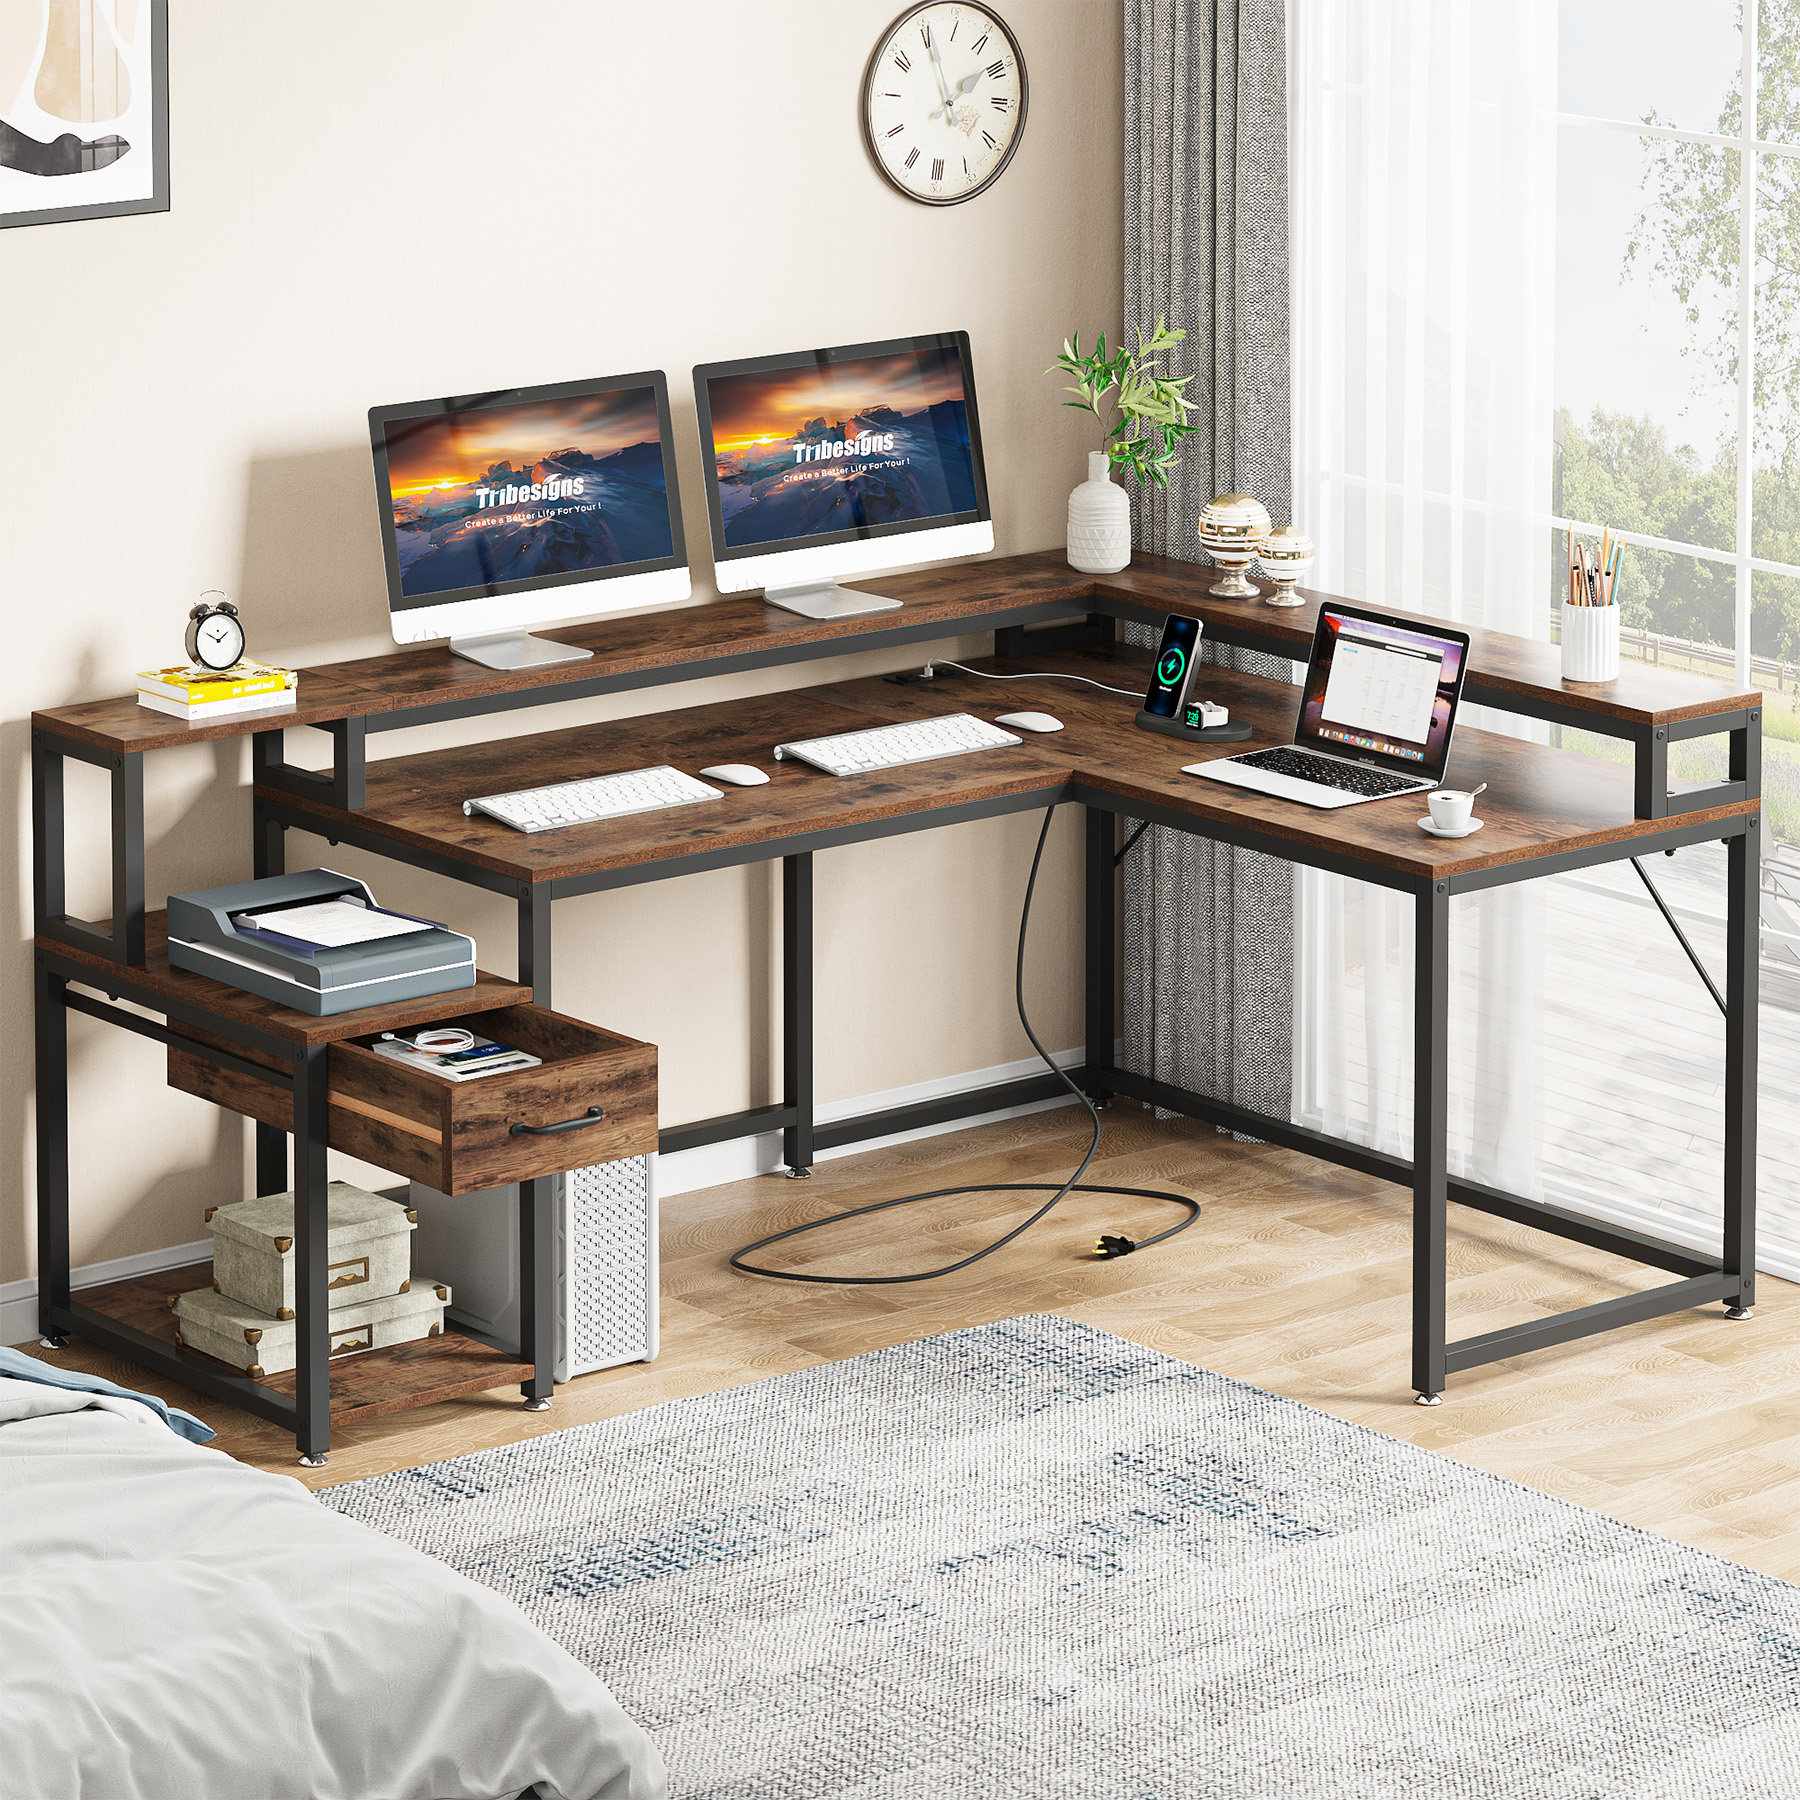 17 Stories 69 Inch L Shaped Desk with Storage Shelf & Reviews